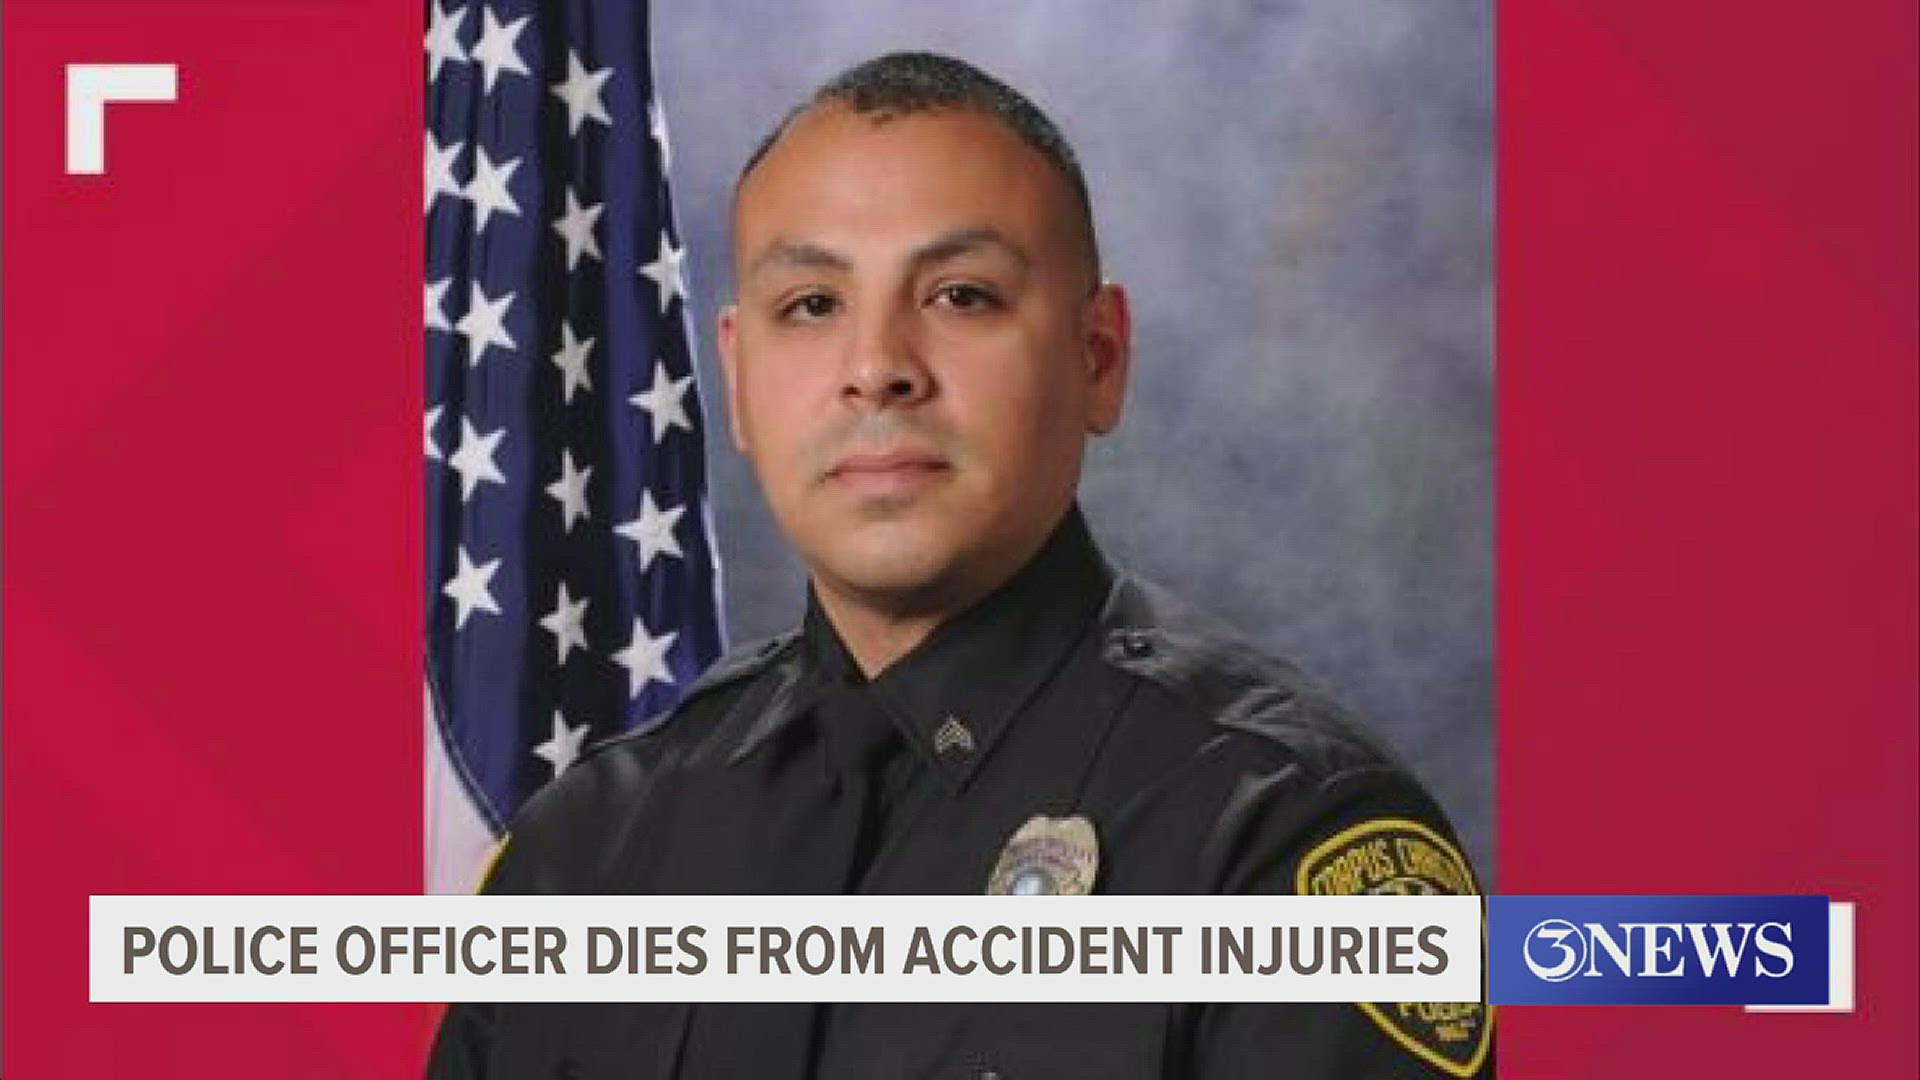 Anthony Silvas said Senior Officer Vicente Ortiz is a hometown hero who died 10 days after working to keep others safe during a funeral procession on May 21.